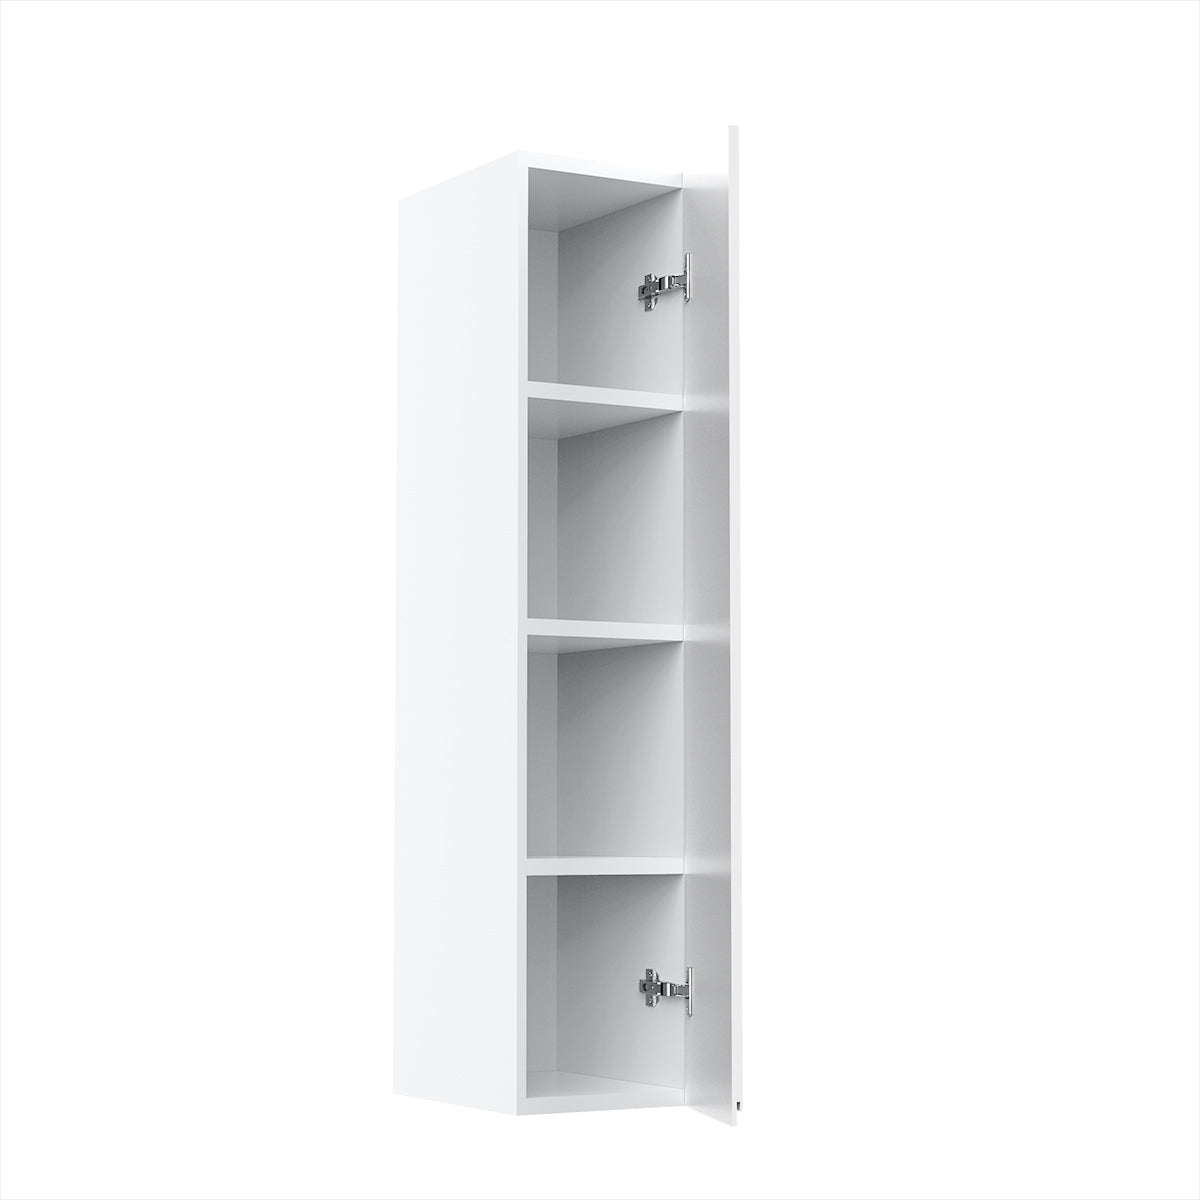 Kitchen Wall Cabinet - RTA - Lacquer white - Single Door Wall Cabinet | 9"W x 42"H x 12"D